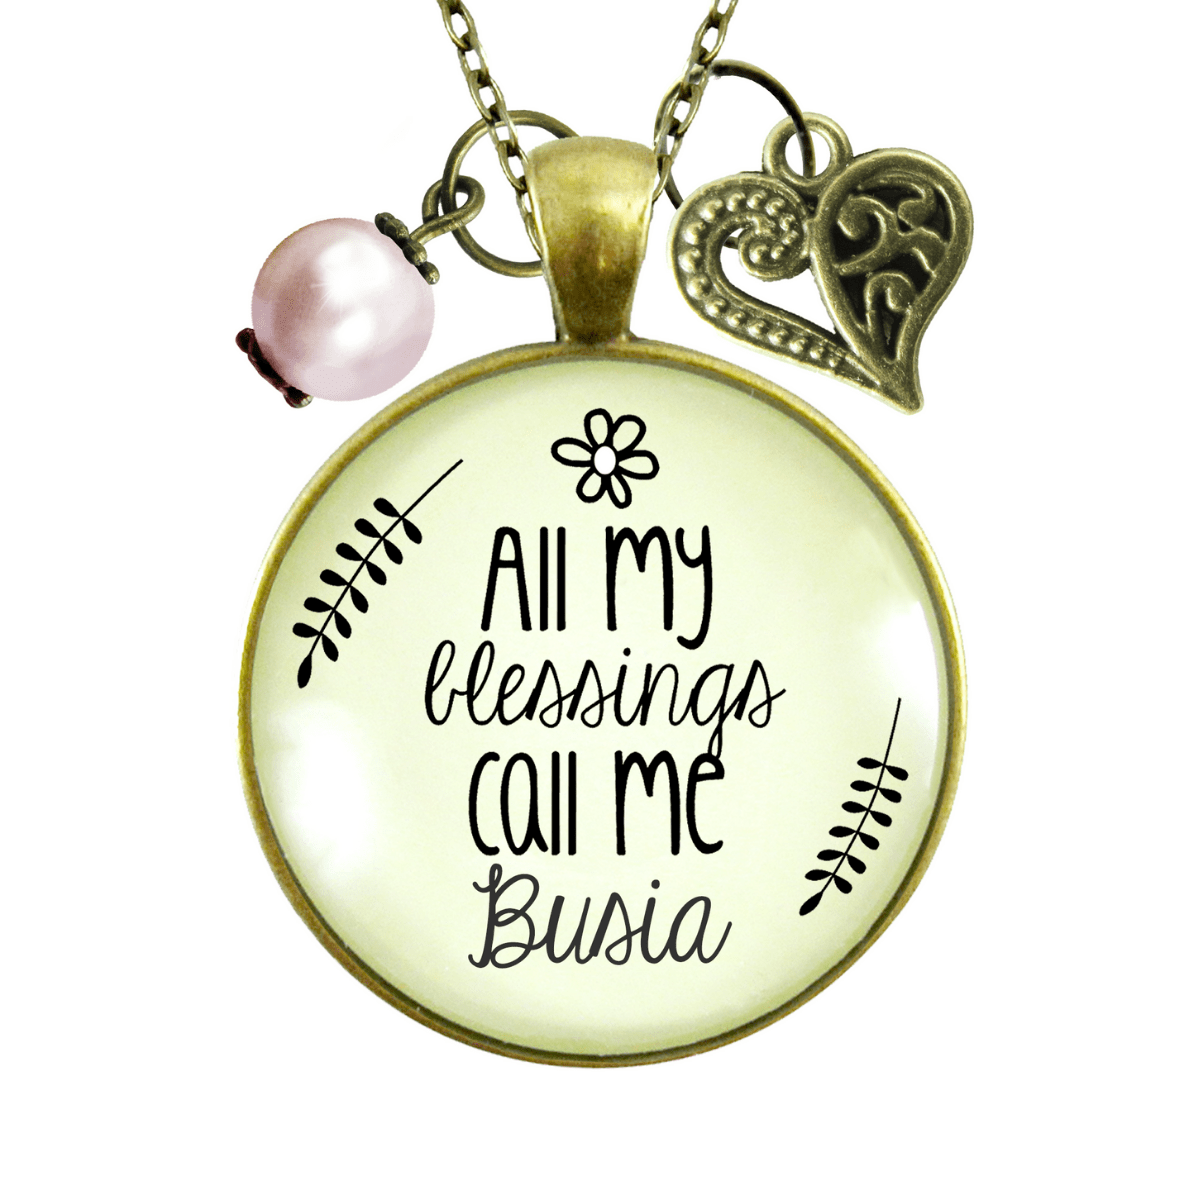 Gutsy Goodness Busia Necklace All My Blessings Polish Grandma Womens Family Gift Jewelry - Gutsy Goodness;Busia Necklace All My Blessings Polish Grandma Womens Family Gift Jewelry - Gutsy Goodness Handmade Jewelry Gifts